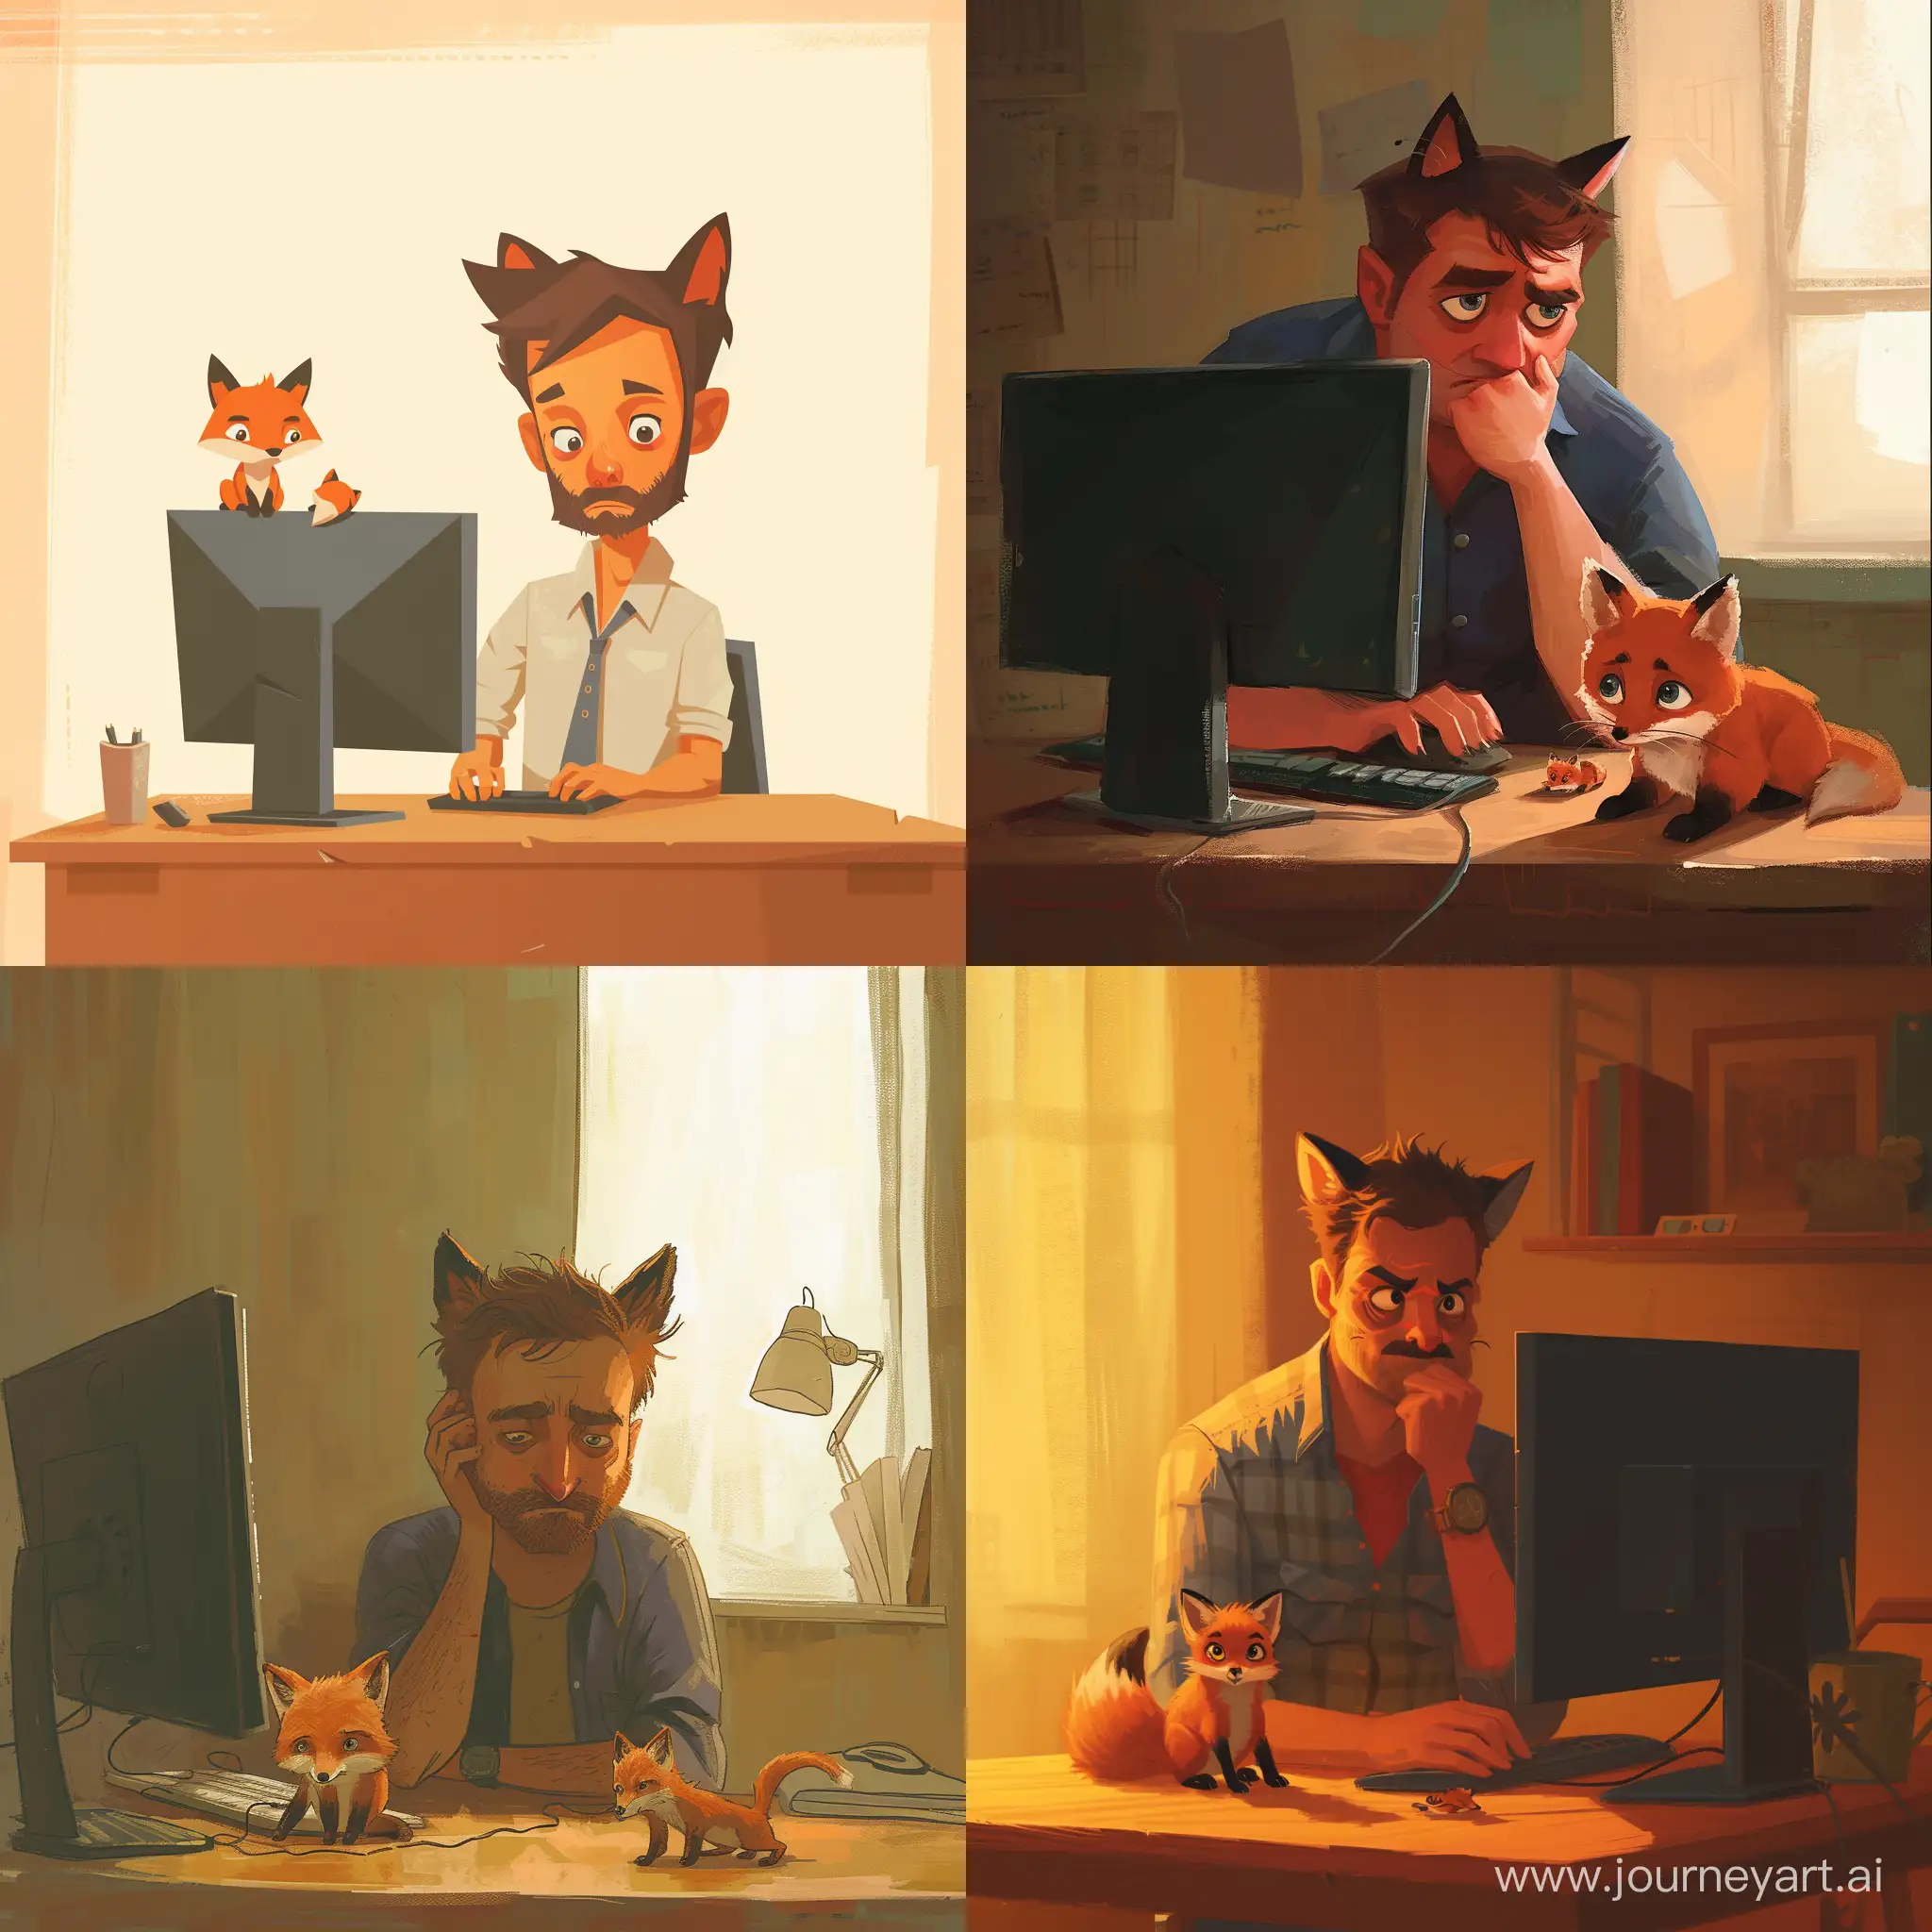 Lonely-Man-with-Cat-Ears-and-Animated-Fox-Cub-Reflective-Moment